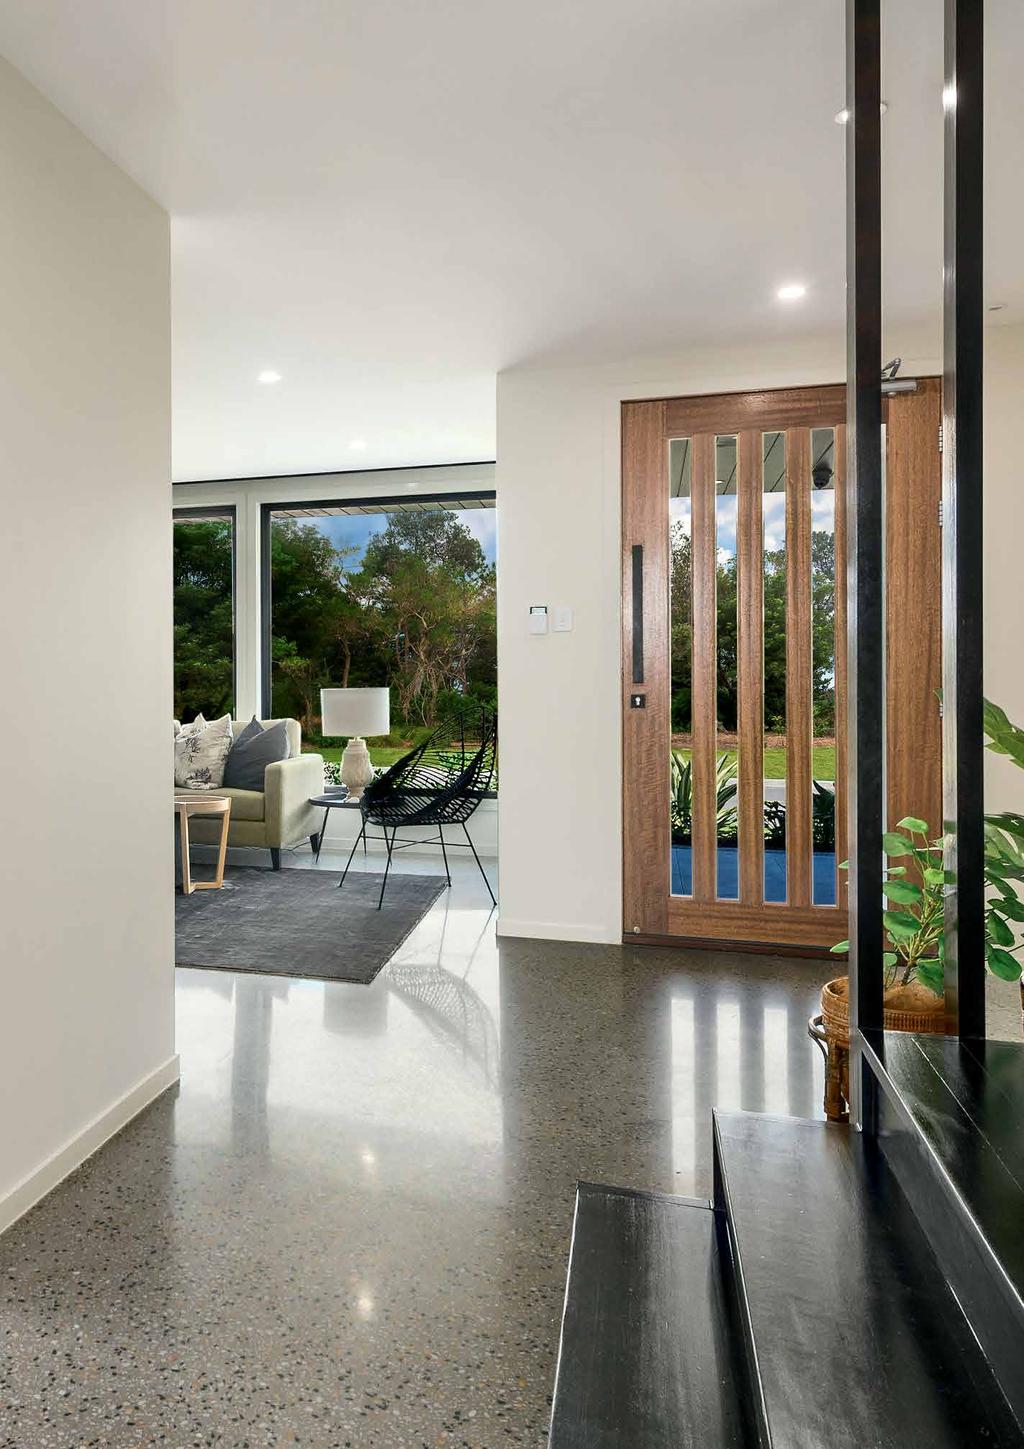 2340mm high internal flush panel doors throughout (to downstairs of doubles only), including robes and linen, with a choice of 7+ Gainsborough internal lever sets in chrome or satin, and cushioned